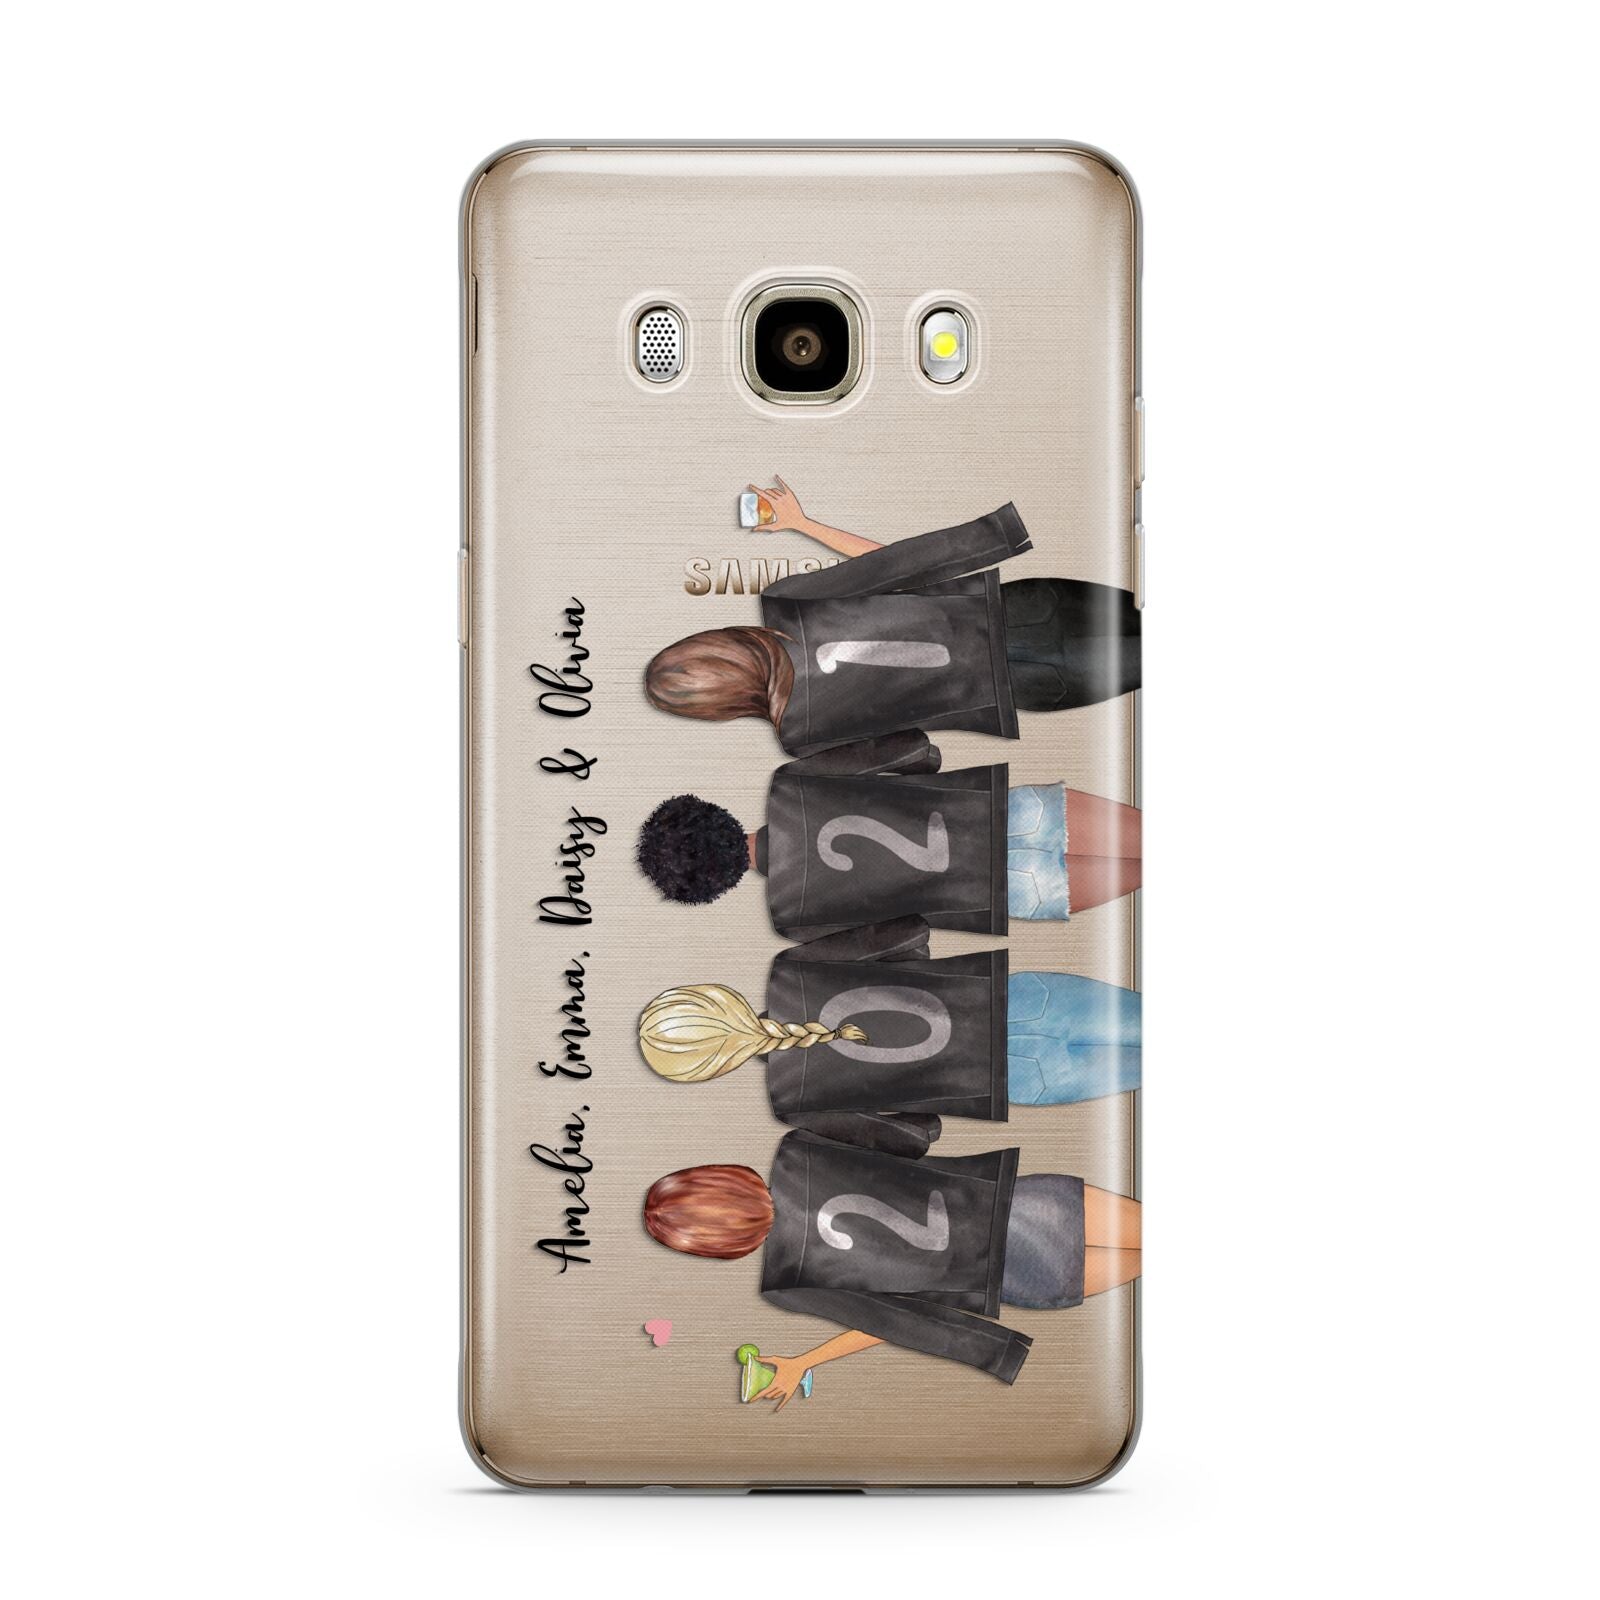 4 Best Friends with Names Samsung Galaxy J7 2016 Case on gold phone